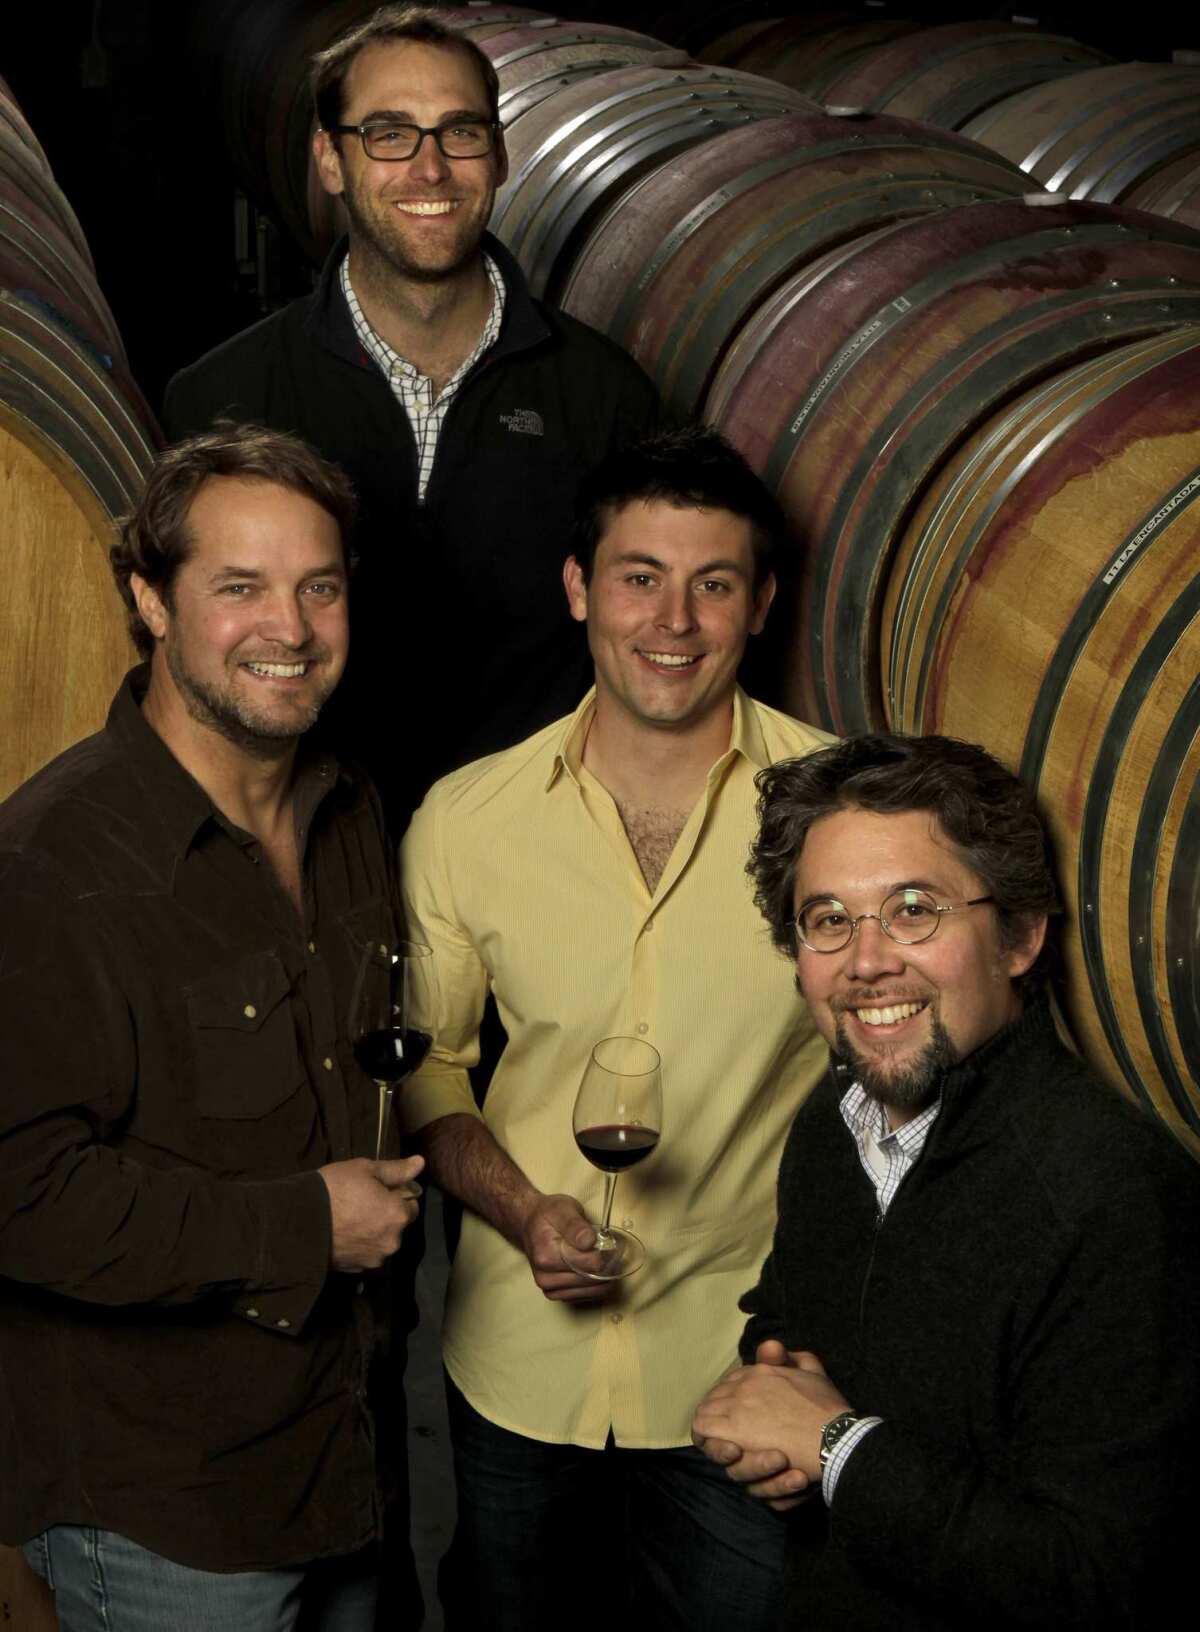 From left, Chad Melville of Melville & Samsara, Justin Willett of Tyler Winery, Ryan Zotovich of Zotovich Cellars, and Sashi Moorman of Evening Land Vineyards, in the Evening Land Vineyards cellar.